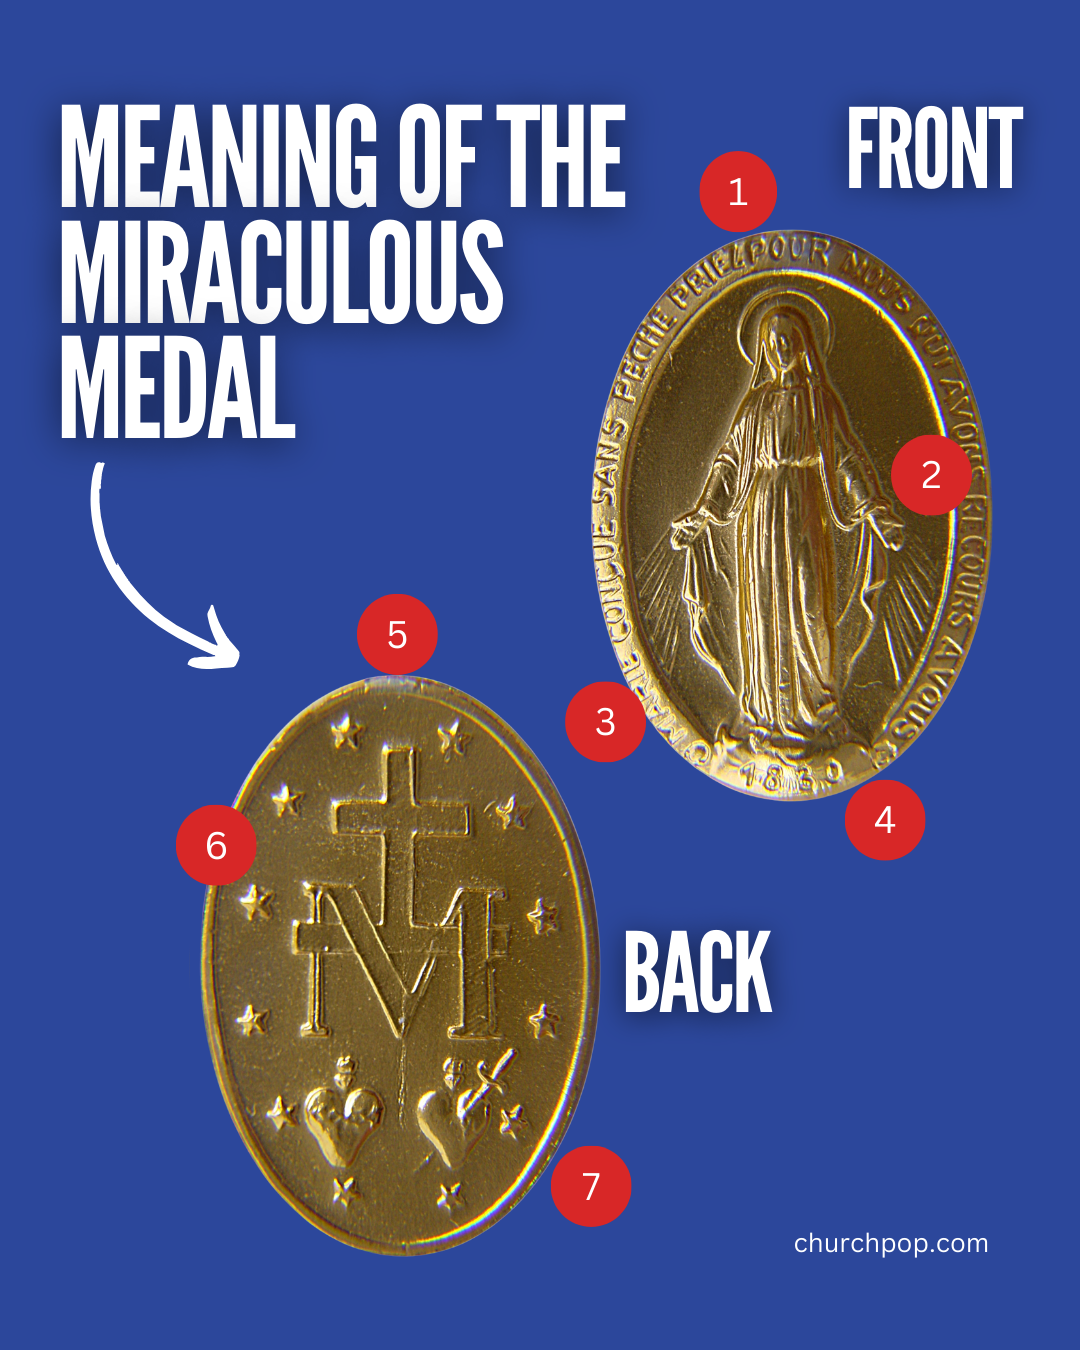 The Hidden Symbolism in the Miraculous Medal